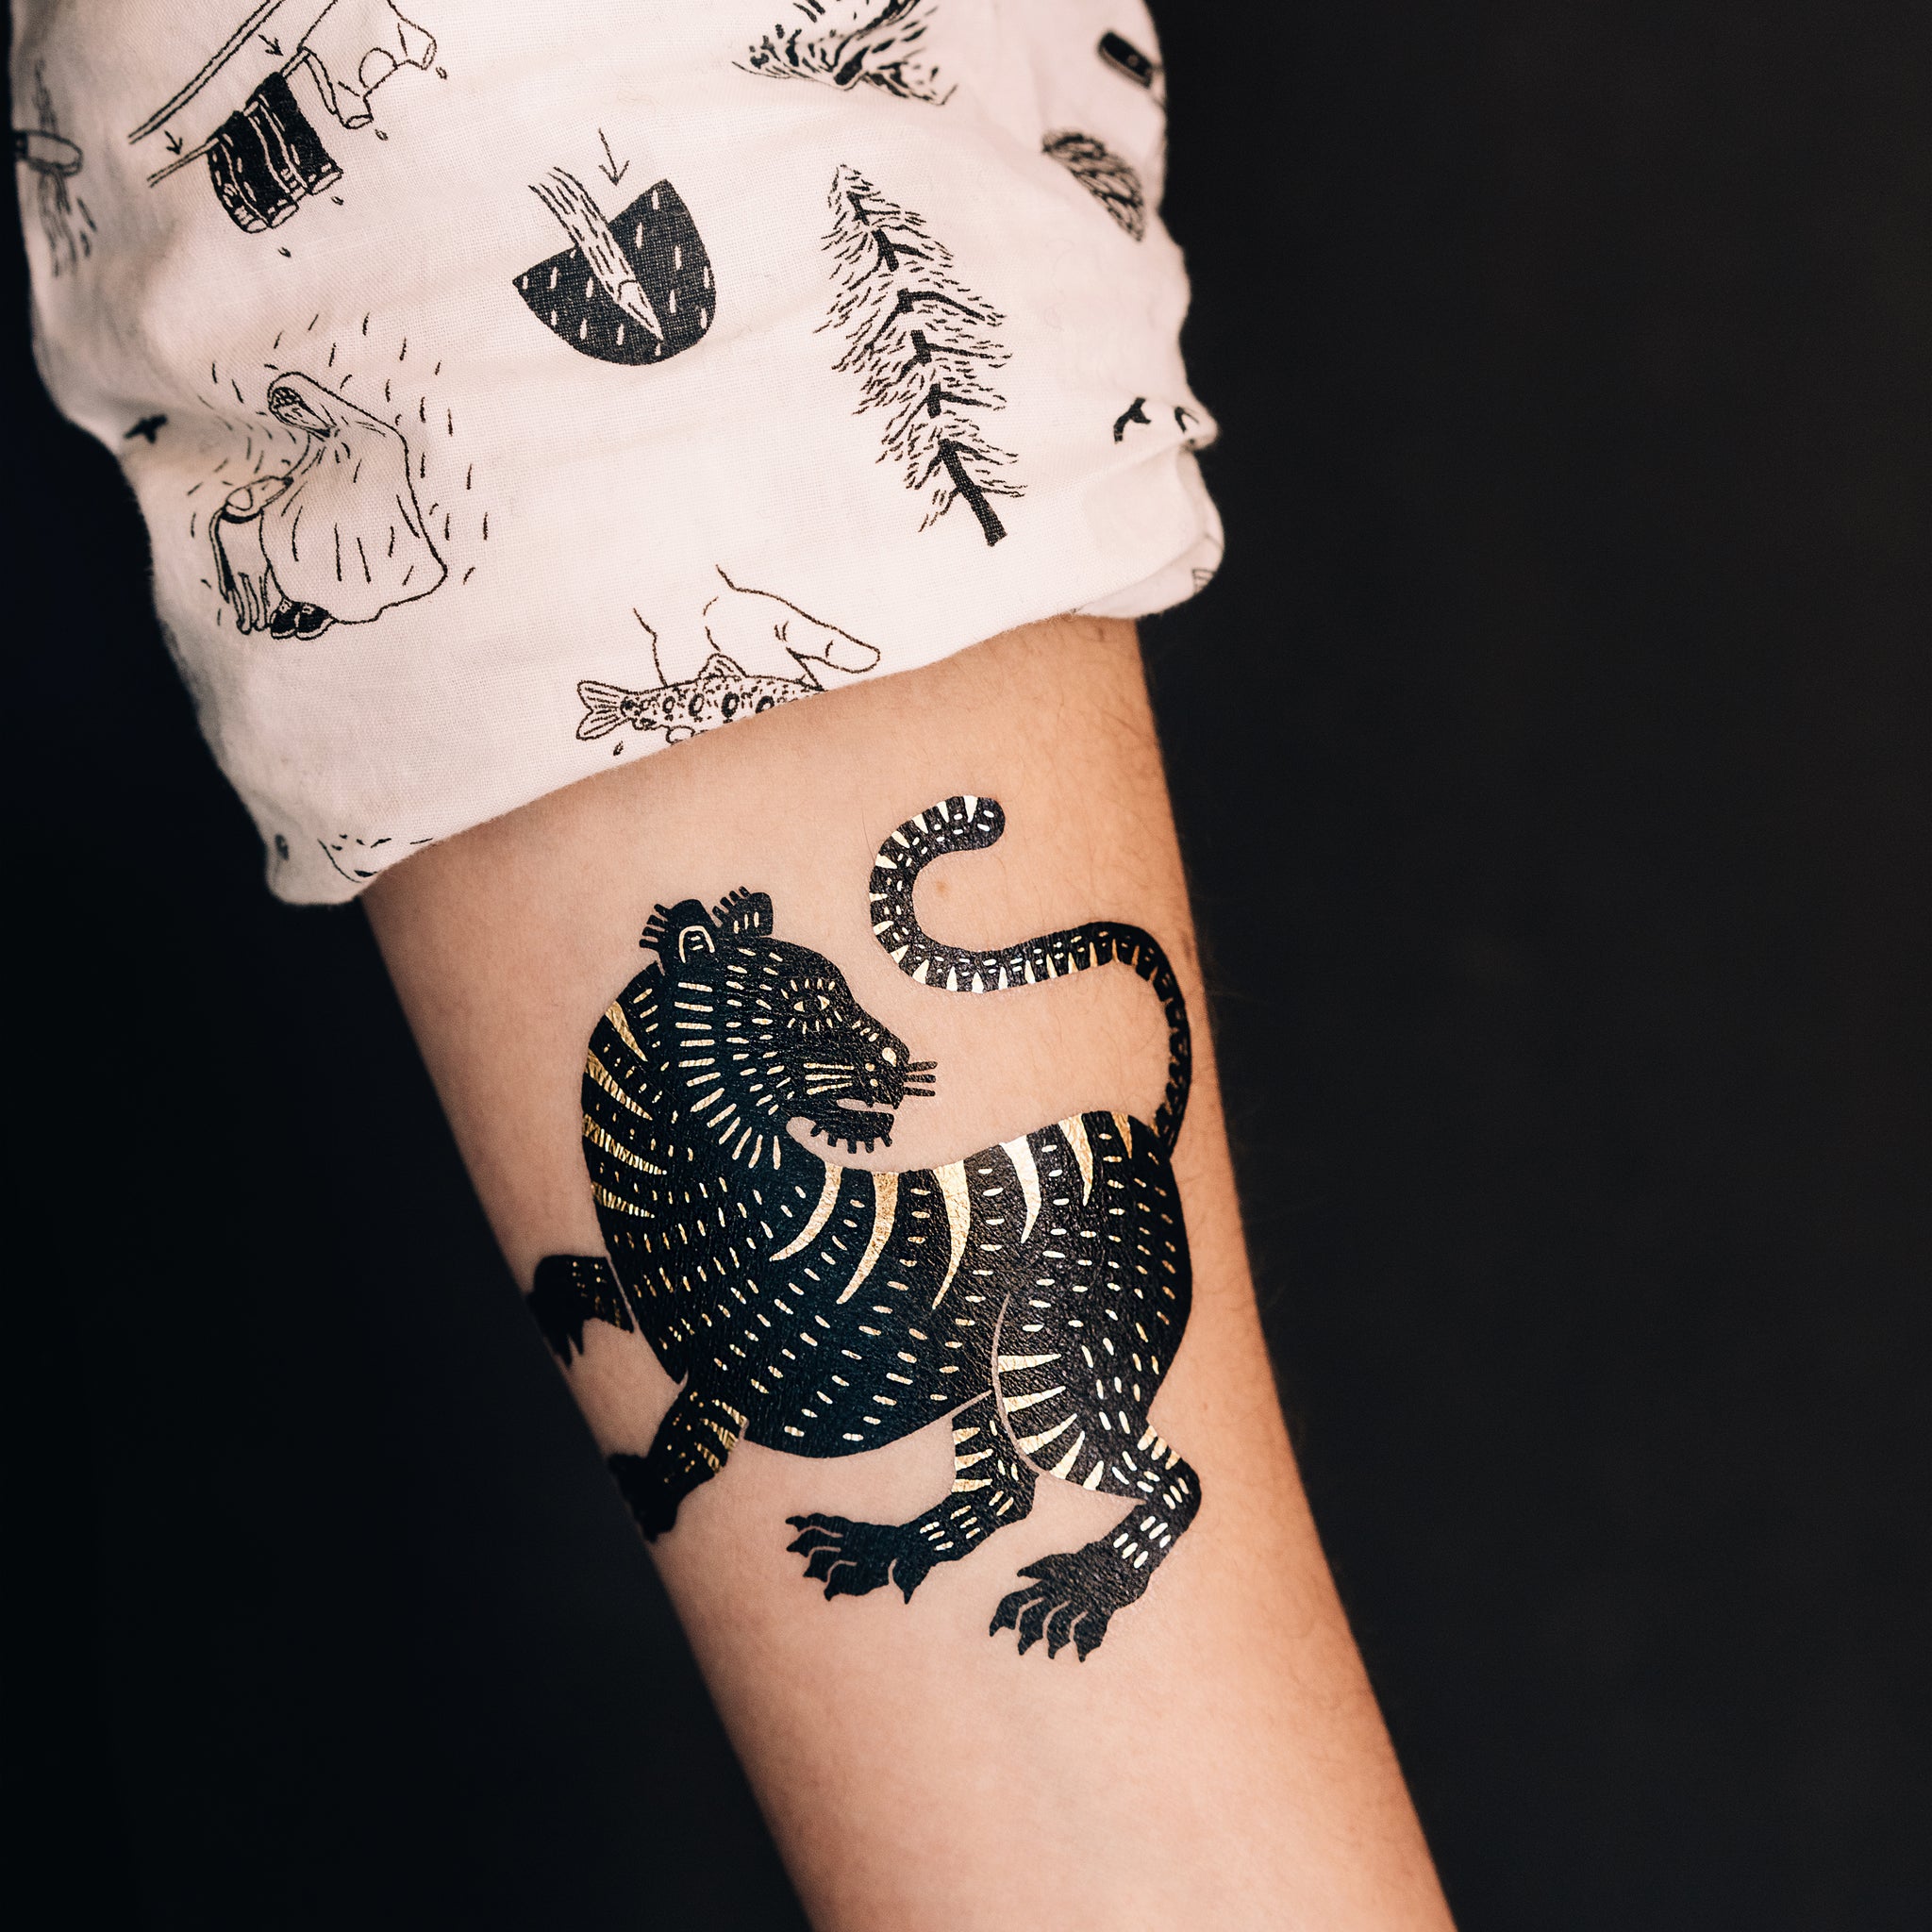 Most Creative Tiny Animal Tattoo Designs For Men And Women - SooShell | Animal  tattoos for women, Small animal tattoos, Animal tattoos for men